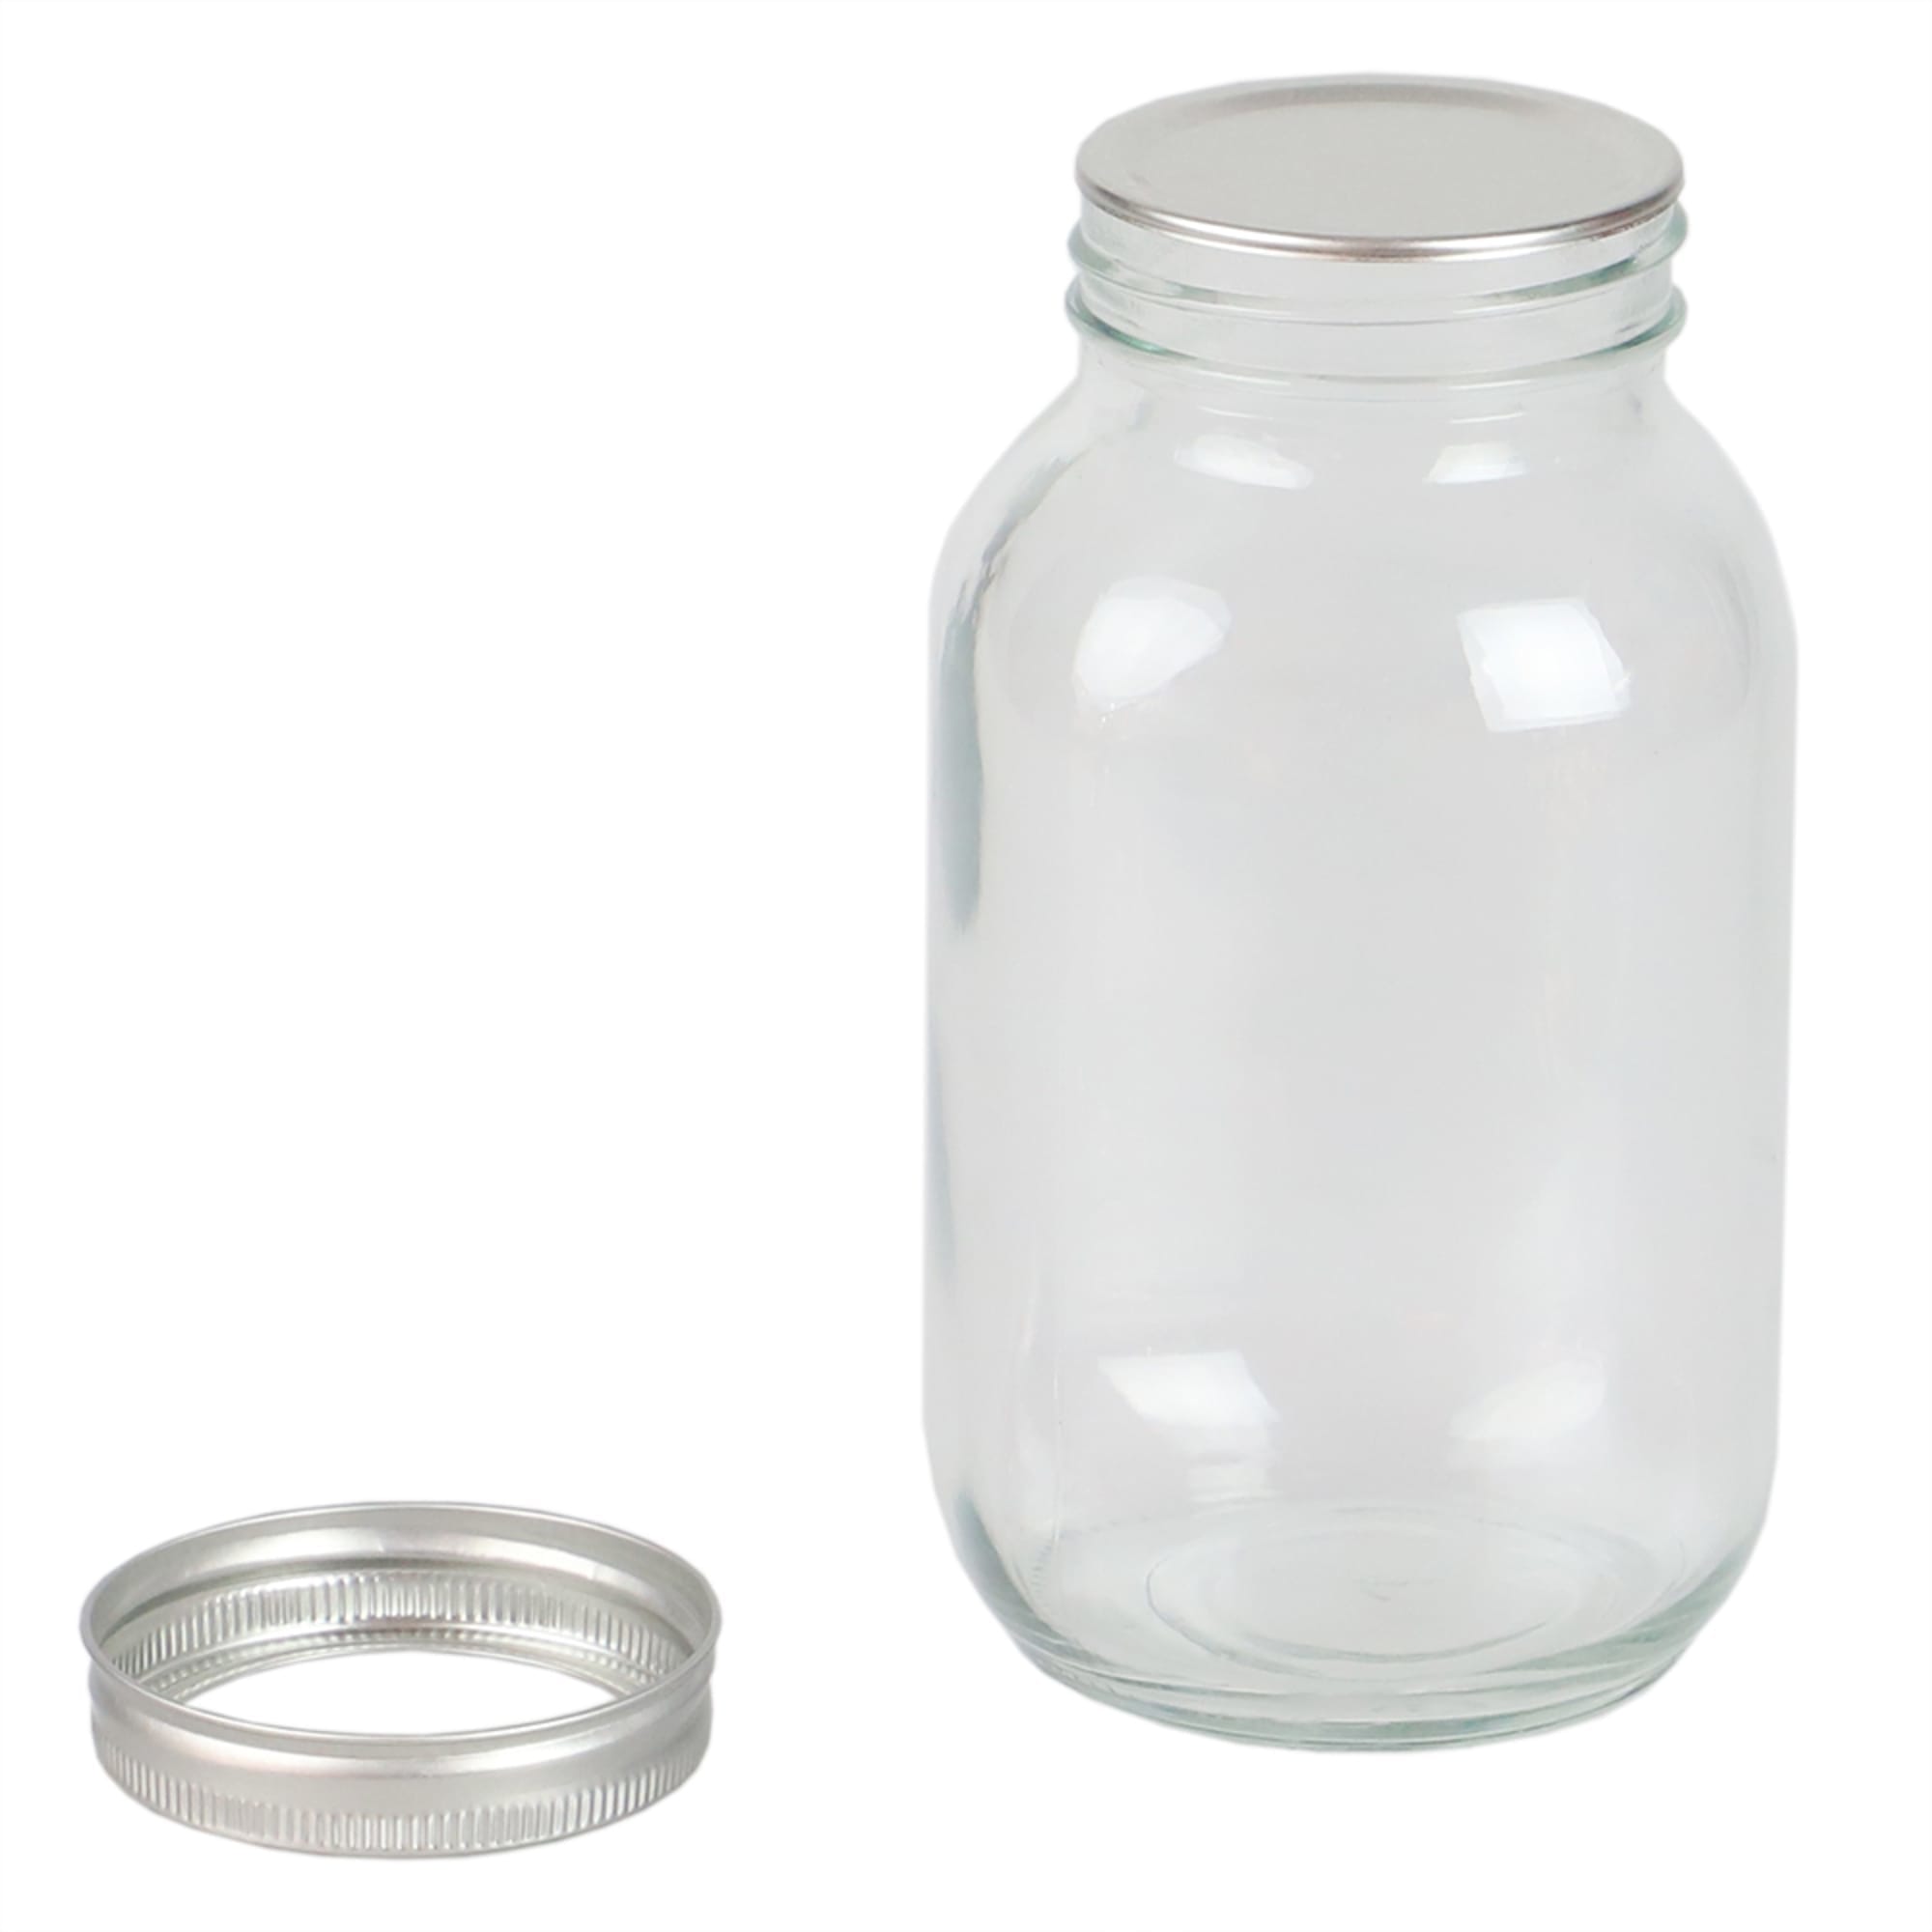 Home Basics 33 oz. Wide Mouth Clear Mason Canning Jar $2.50 EACH, CASE PACK OF 12